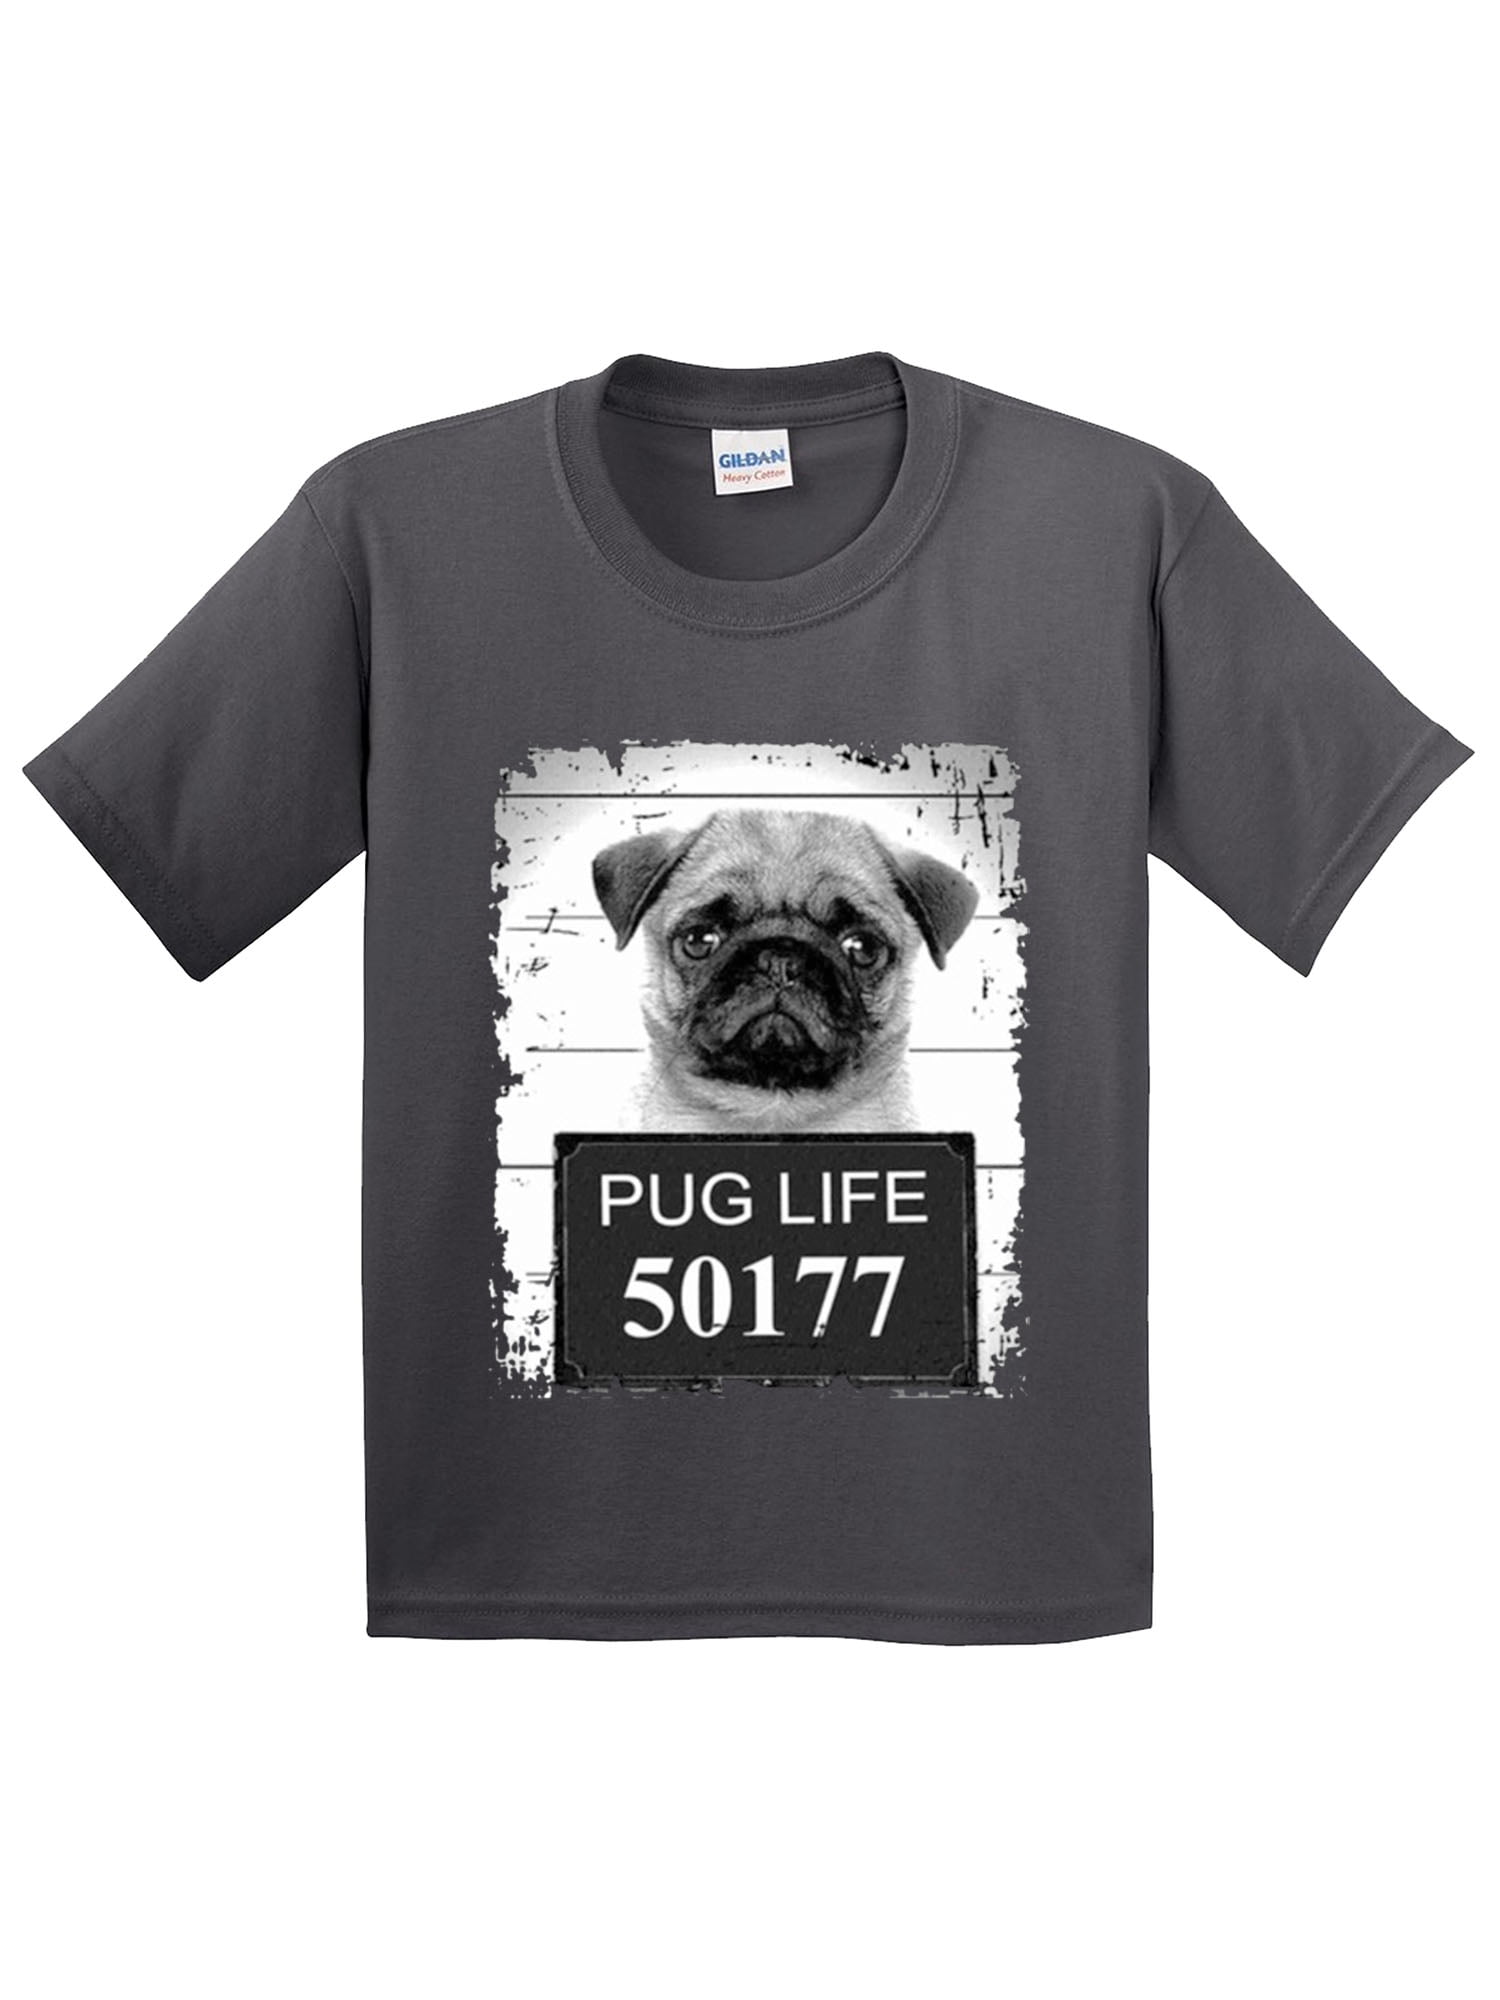 Pug Est 1572 T Shirt Pick Your Size Youth Medium to 6 X Large